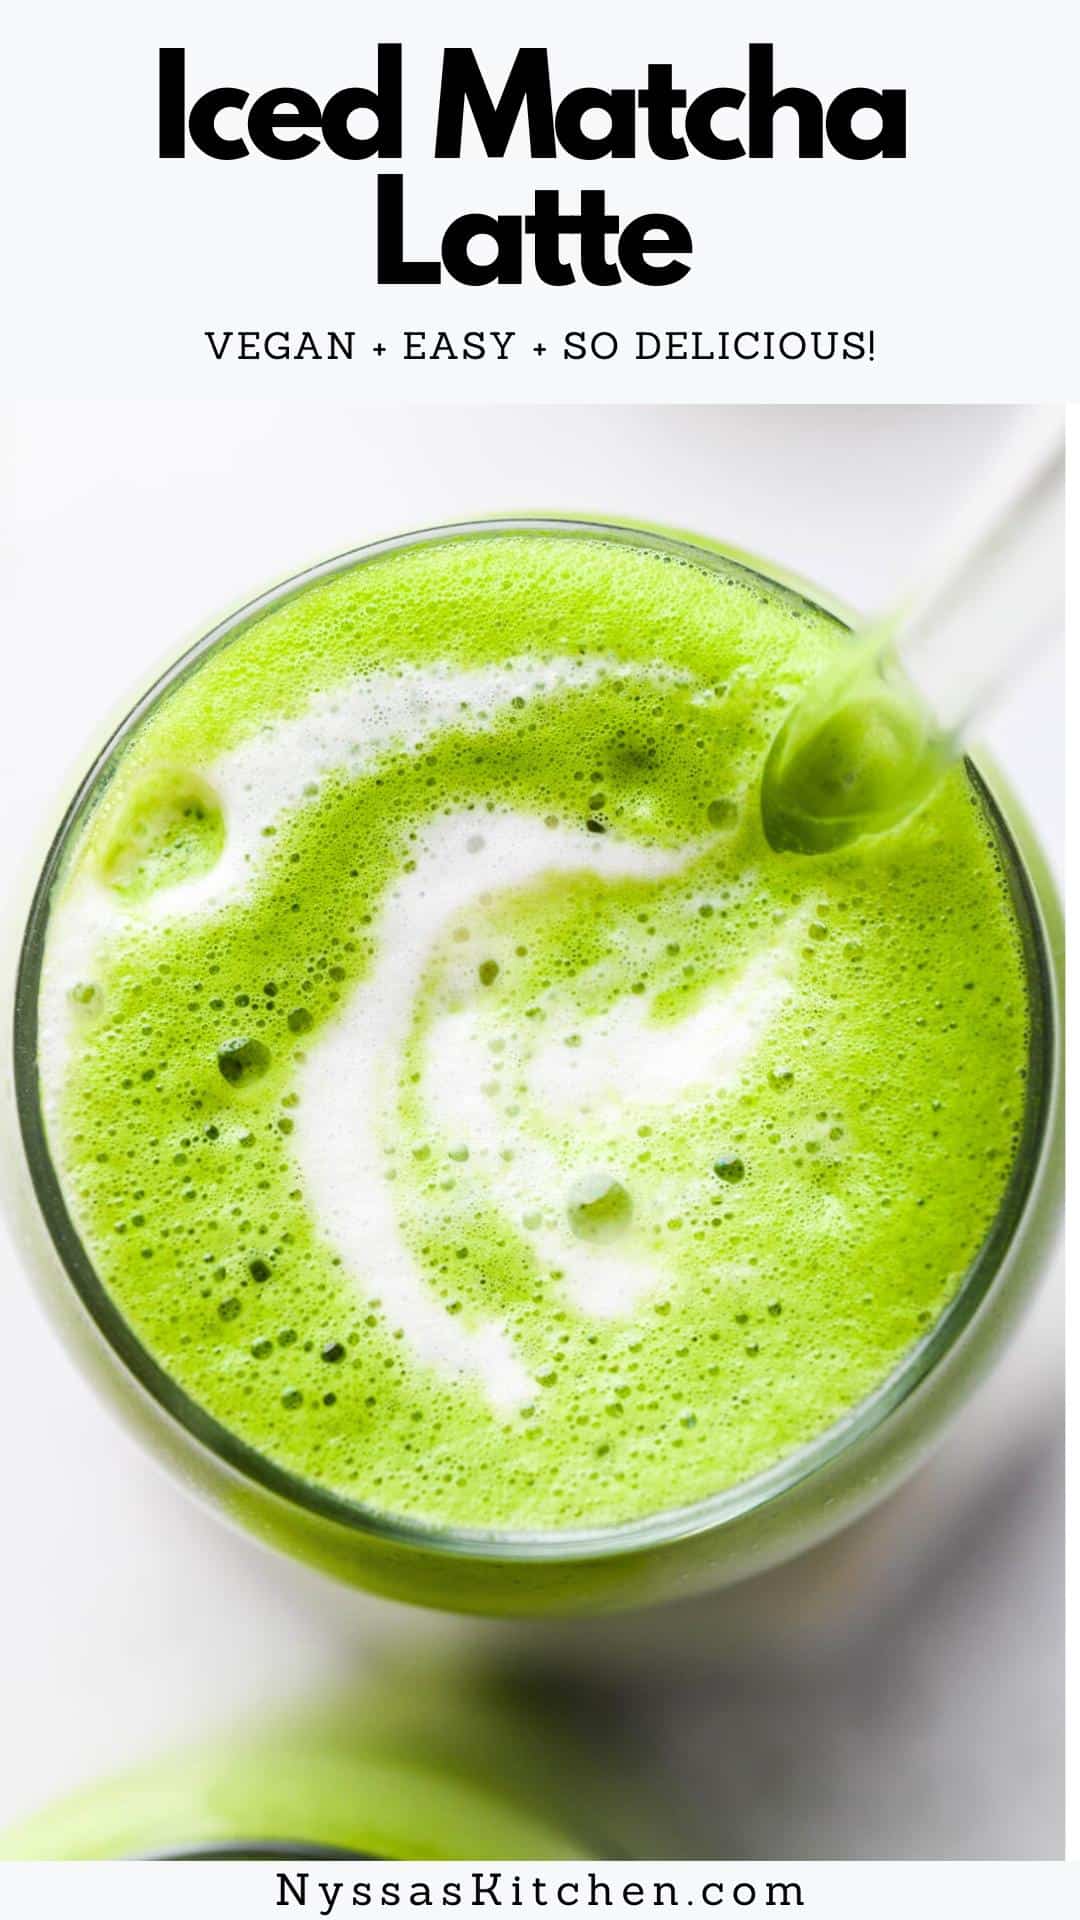 This iced matcha latte recipe is super easy to make at home! It is a simple DIY matcha that's creamy, refreshing, and better than Starbucks (truly!). Made with good for you ingredients like matcha powder, dairy free milk, vanilla, and lightly sweetened to taste. Vegan, dairy free, paleo friendly, Whole30 option.